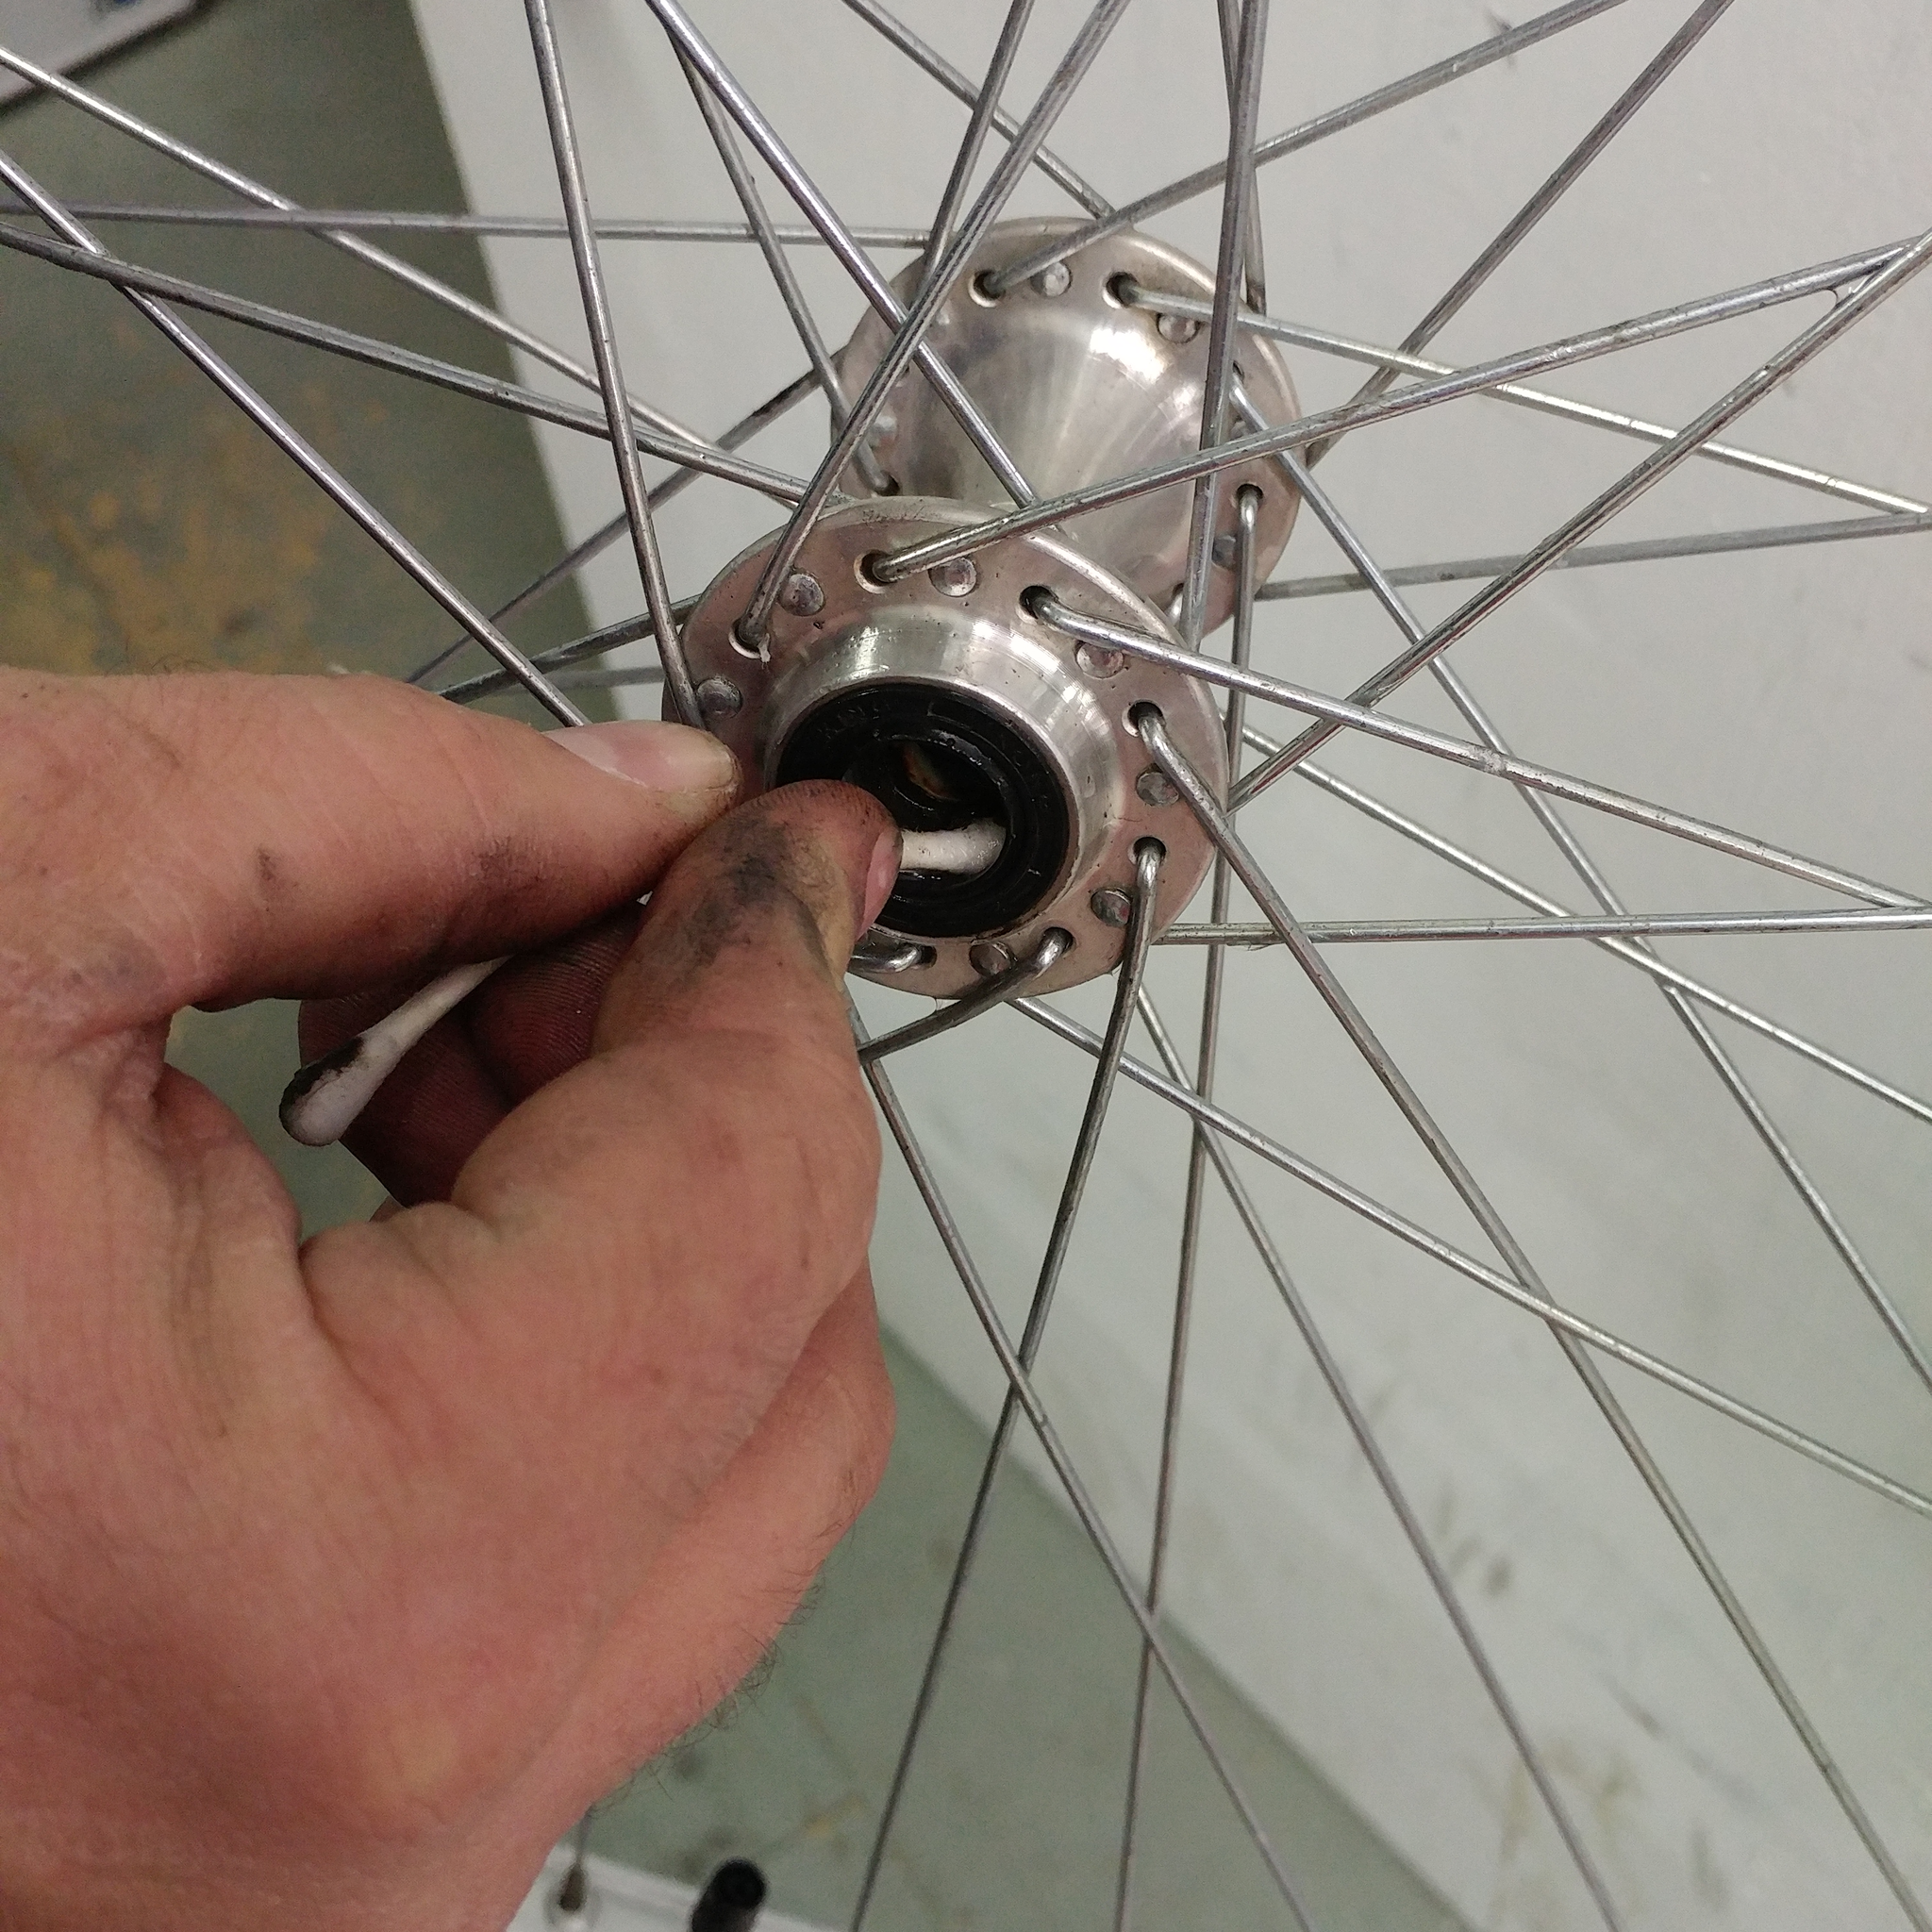 A q-tip is being used to clean out the axel of a bicycle wheel.